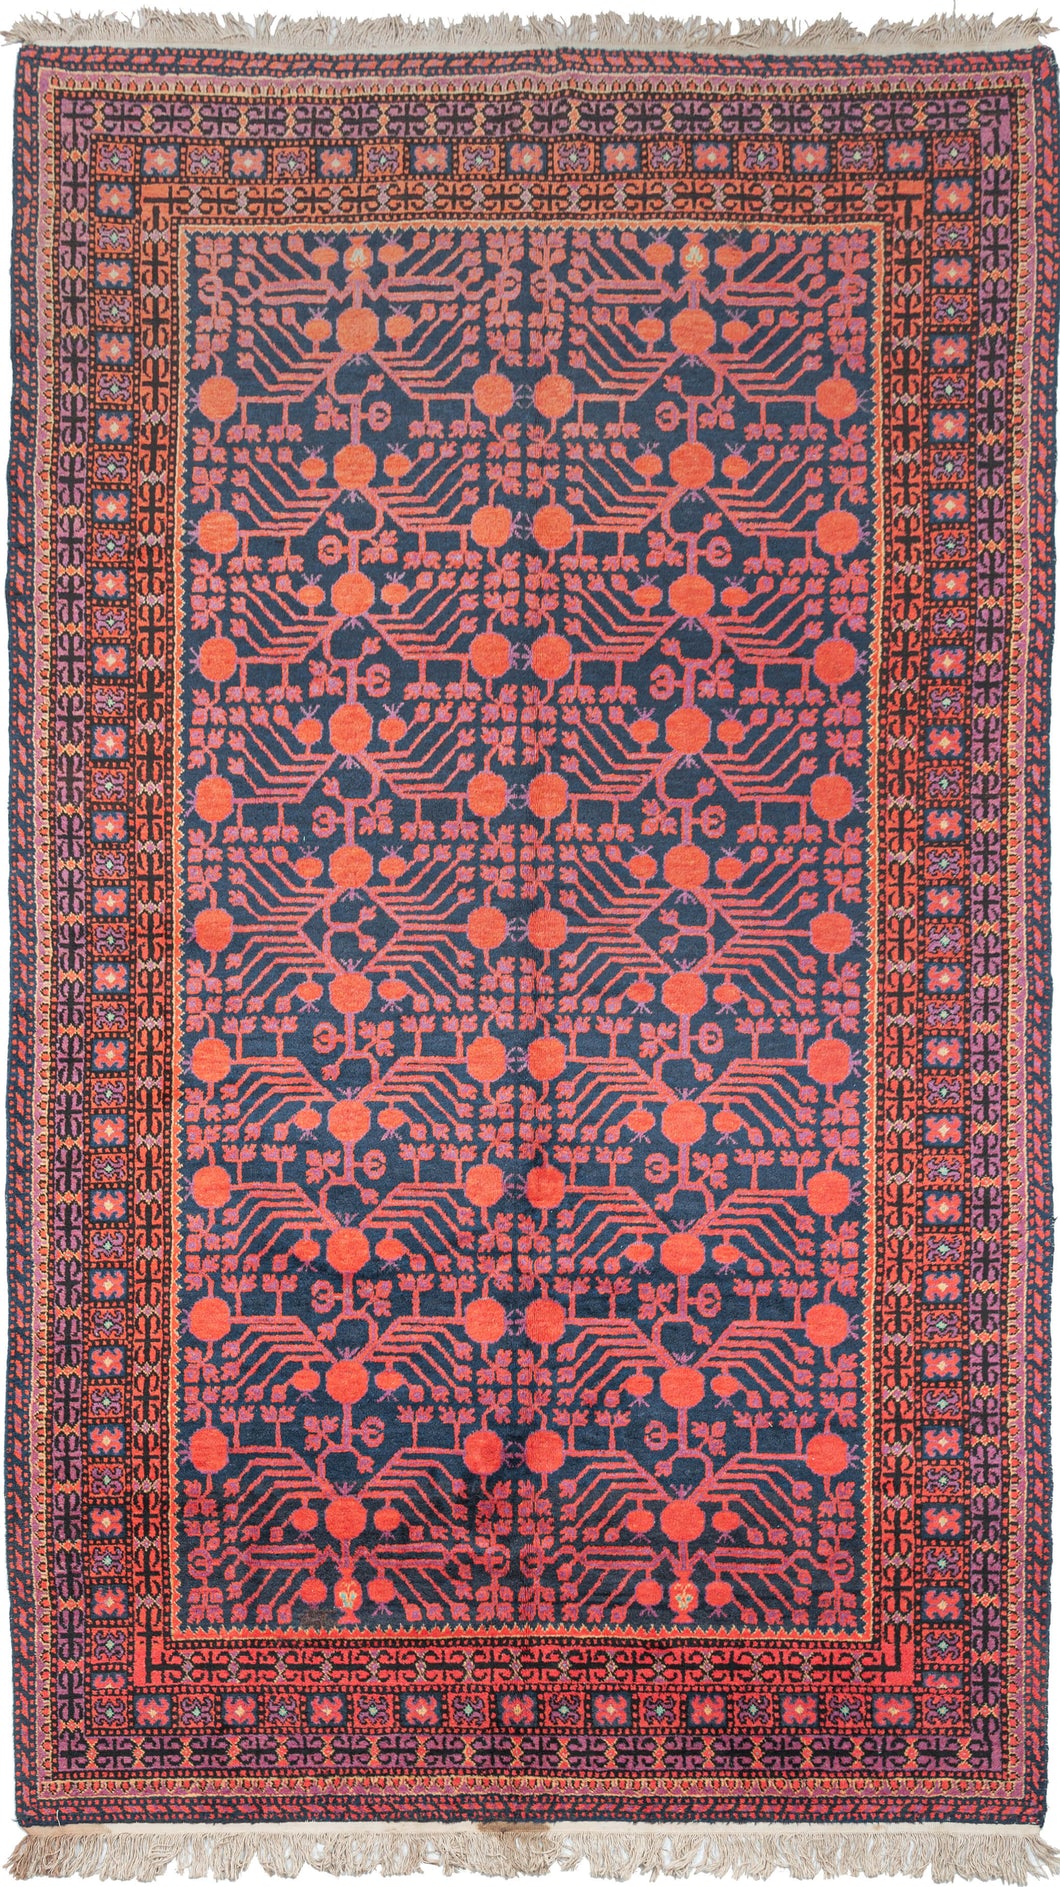 This Khotan rug was woven in Northwest China, which is also known as East Turkestan, during the second quarter of the 20th century.   This rug features an all over design of interconnected vines with blossoming red and purple pomegranates on a navy ground.  Framed by multiple thin borders with latchhooked devices. Nice fluffy full pile.